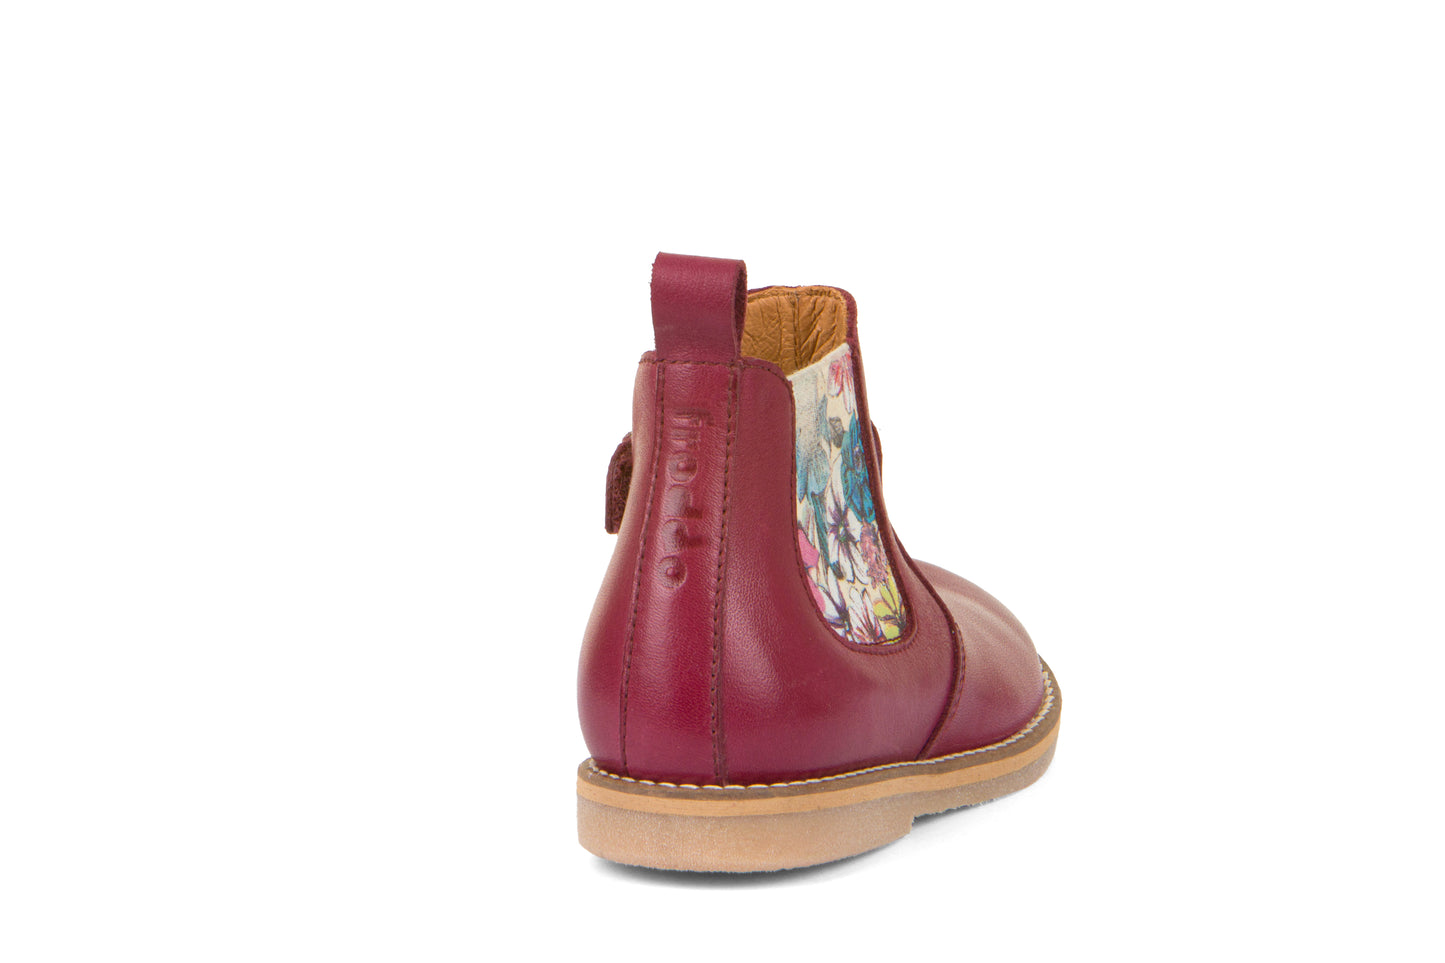 Chelys Low Chelsea Boot in Burgundy Leather